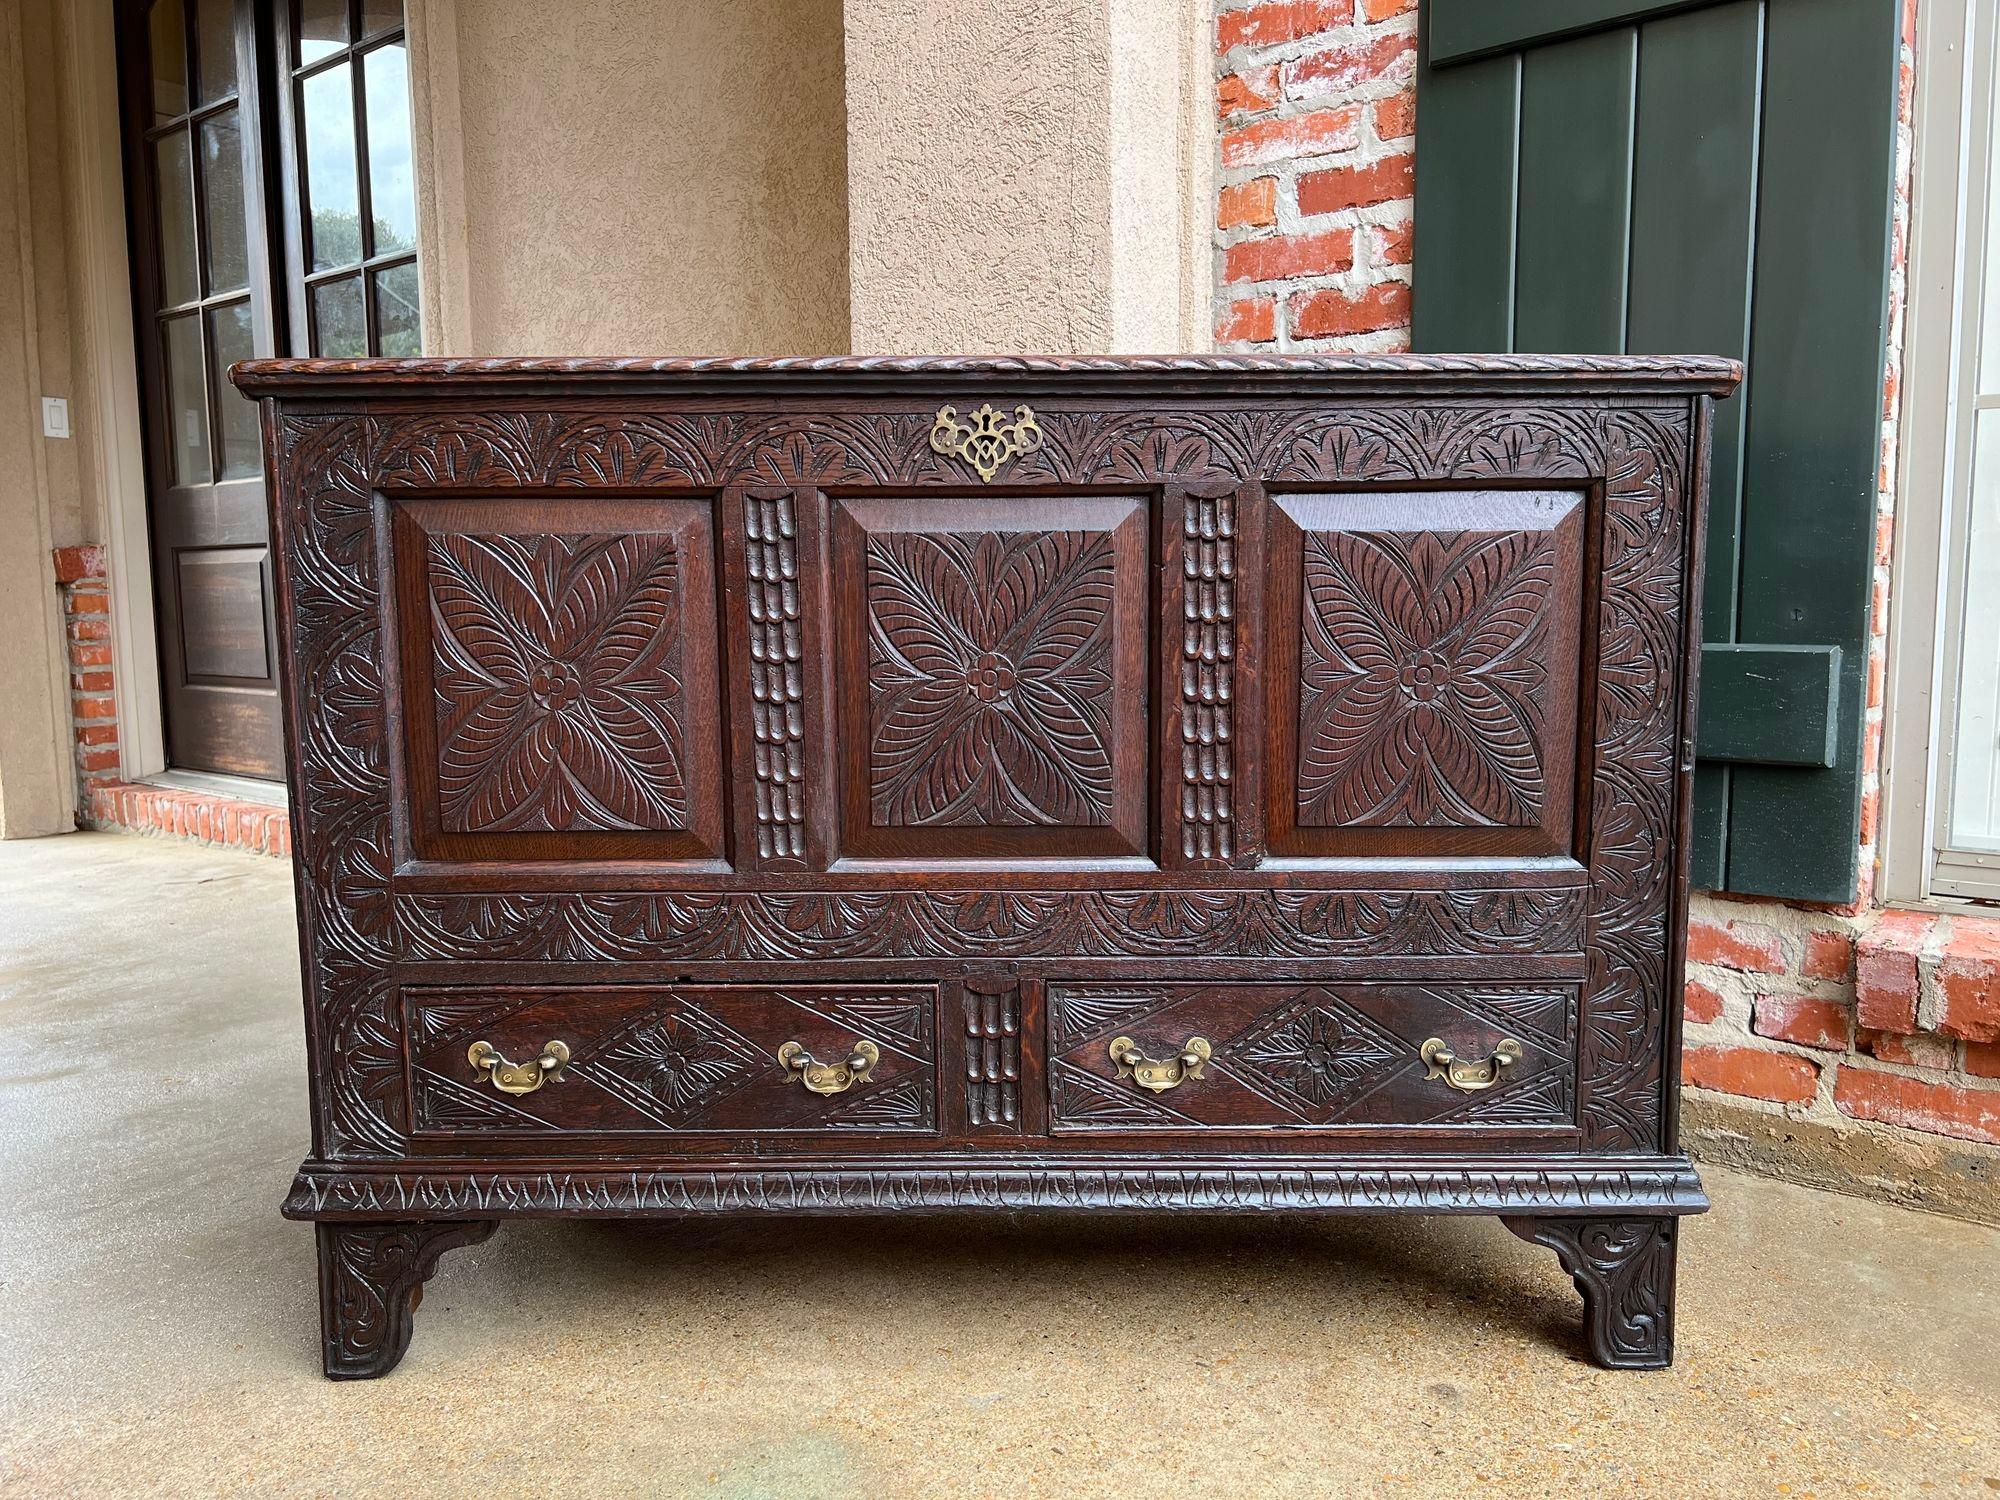 19th century Antique English Trunk coffer blanket Chest Carved Oak Foyer table.

Direct from England, a wonderfully hand carved English “coffer”, “mule chest” or trunk! Regardless of what you call it, this chest has superb hand carving on all four